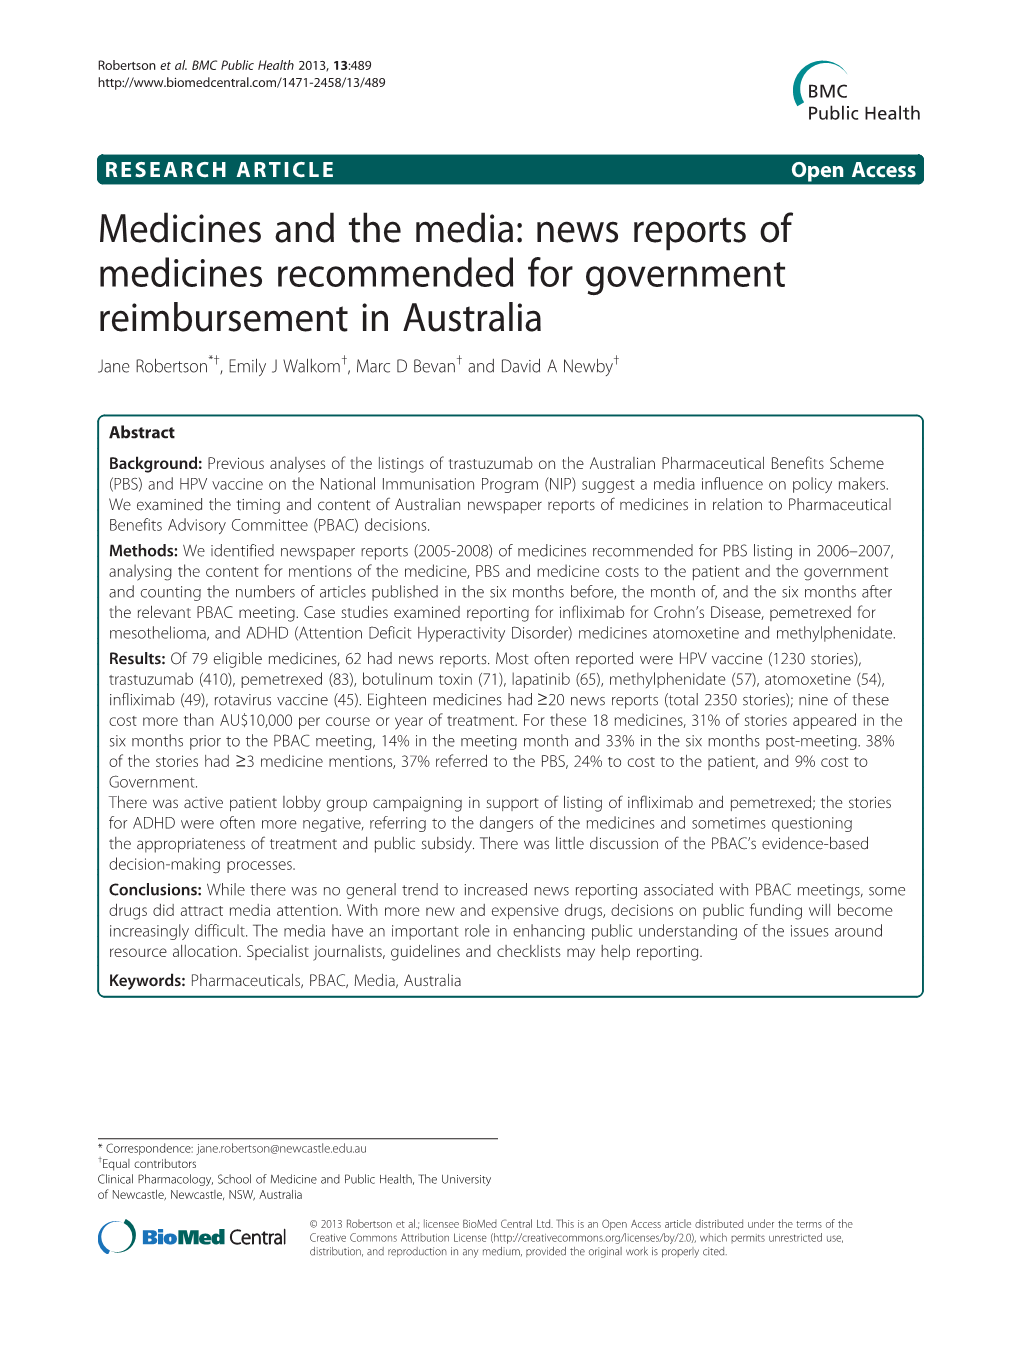 Medicines and the Media